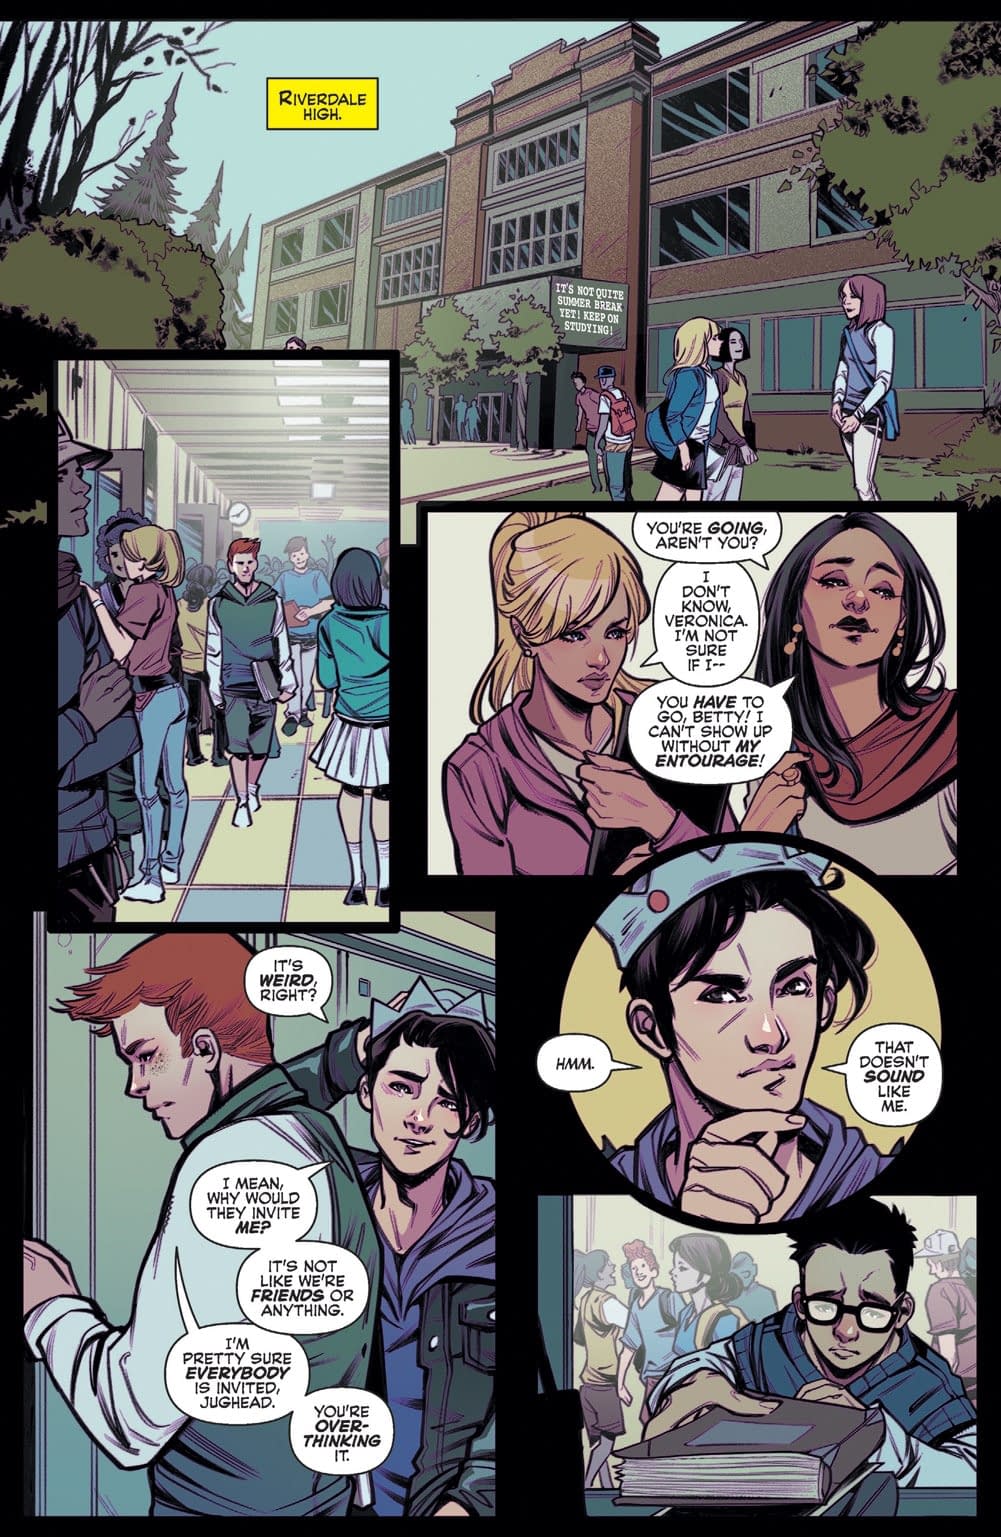 Cheryl's Tips for Dealing with Bullies in Next Week's Blossoms 666 #1